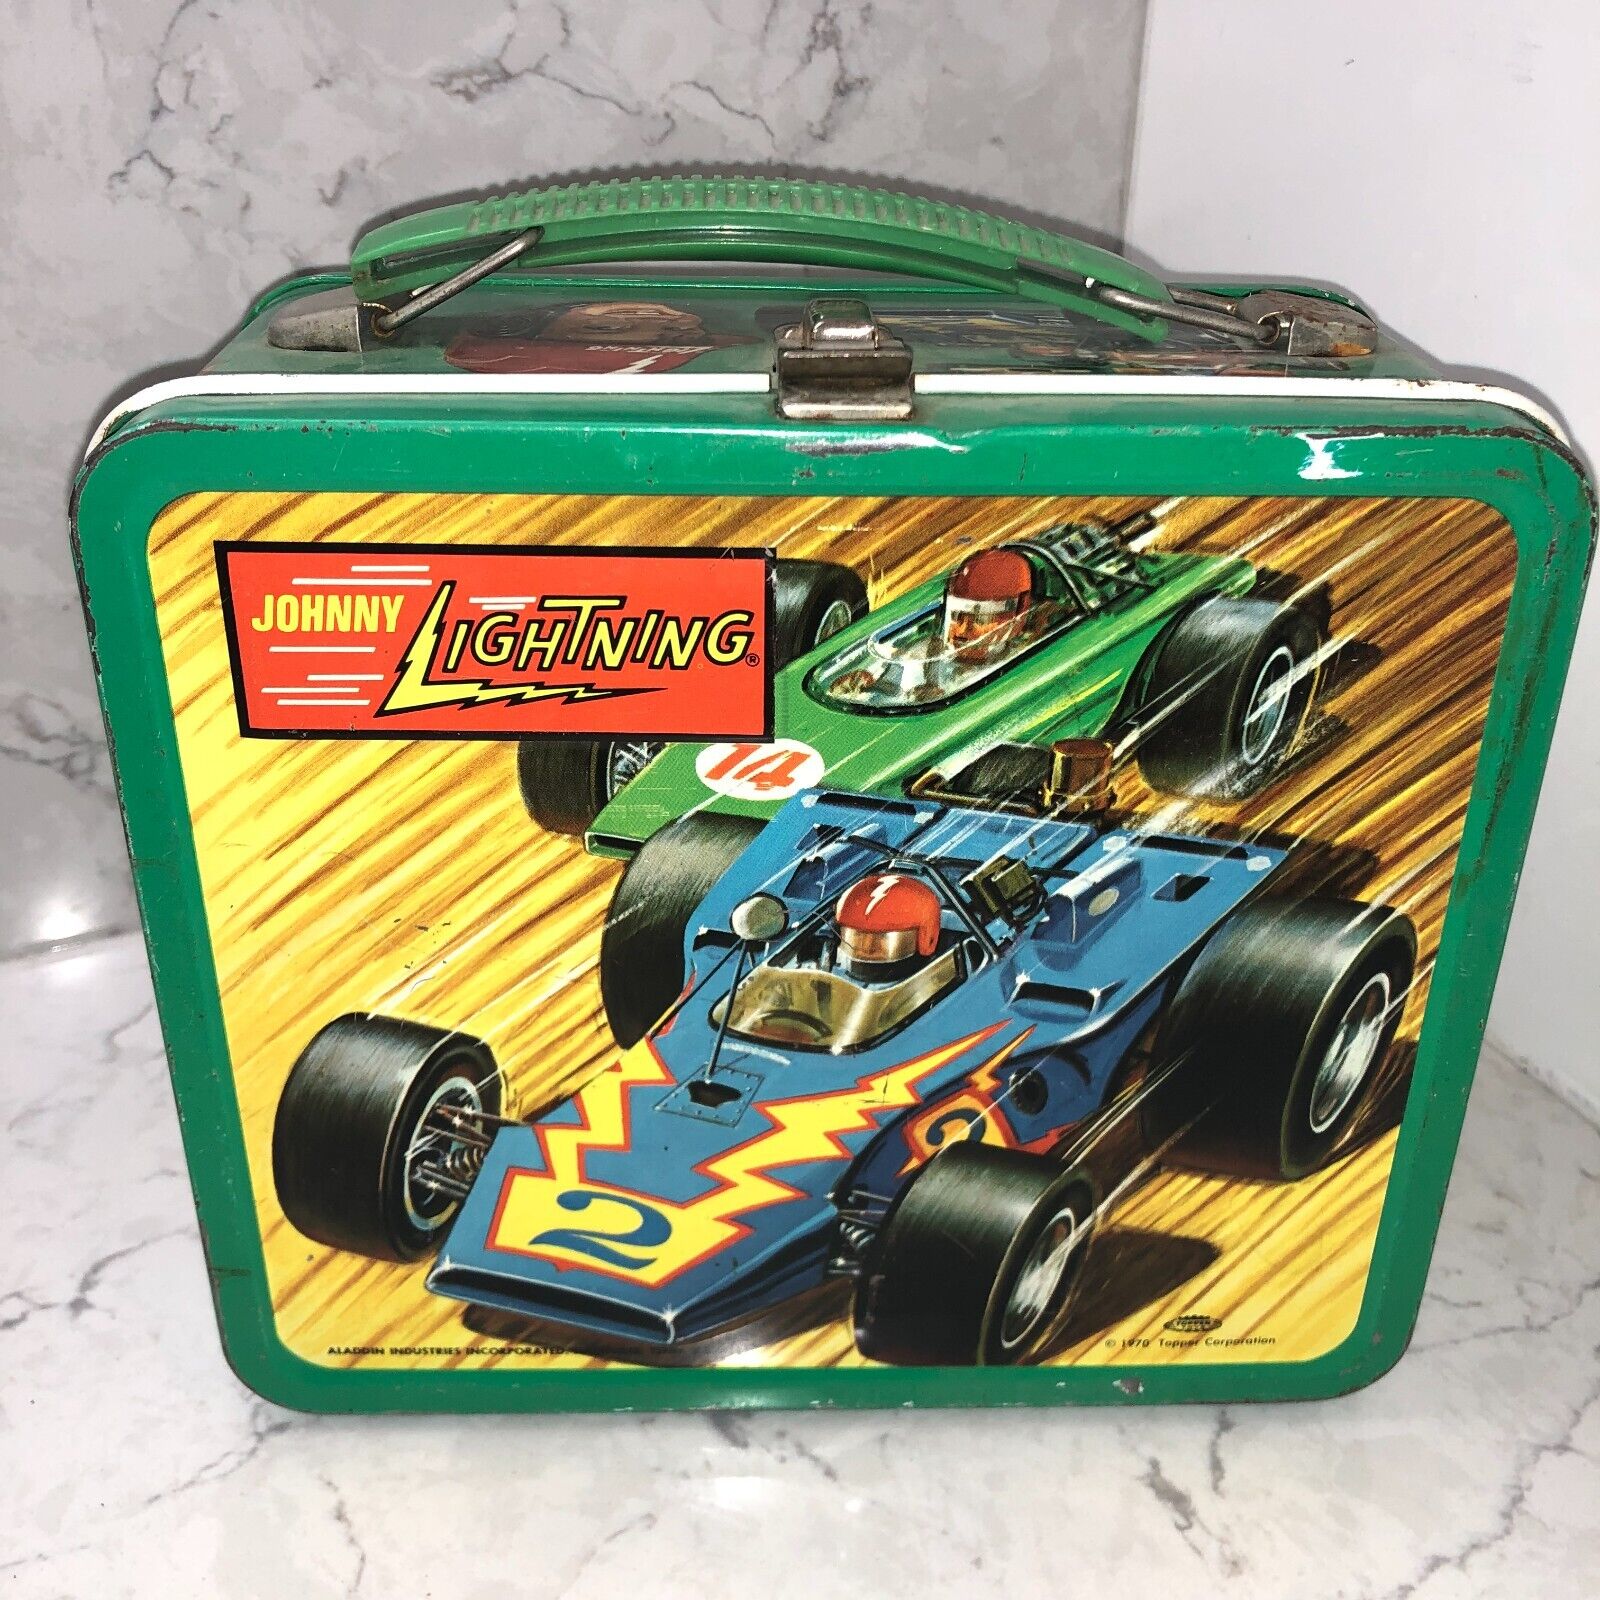 1970 Topper Johnny Lightning Plastic Handle Kids Metal Lunch Box No Thermos